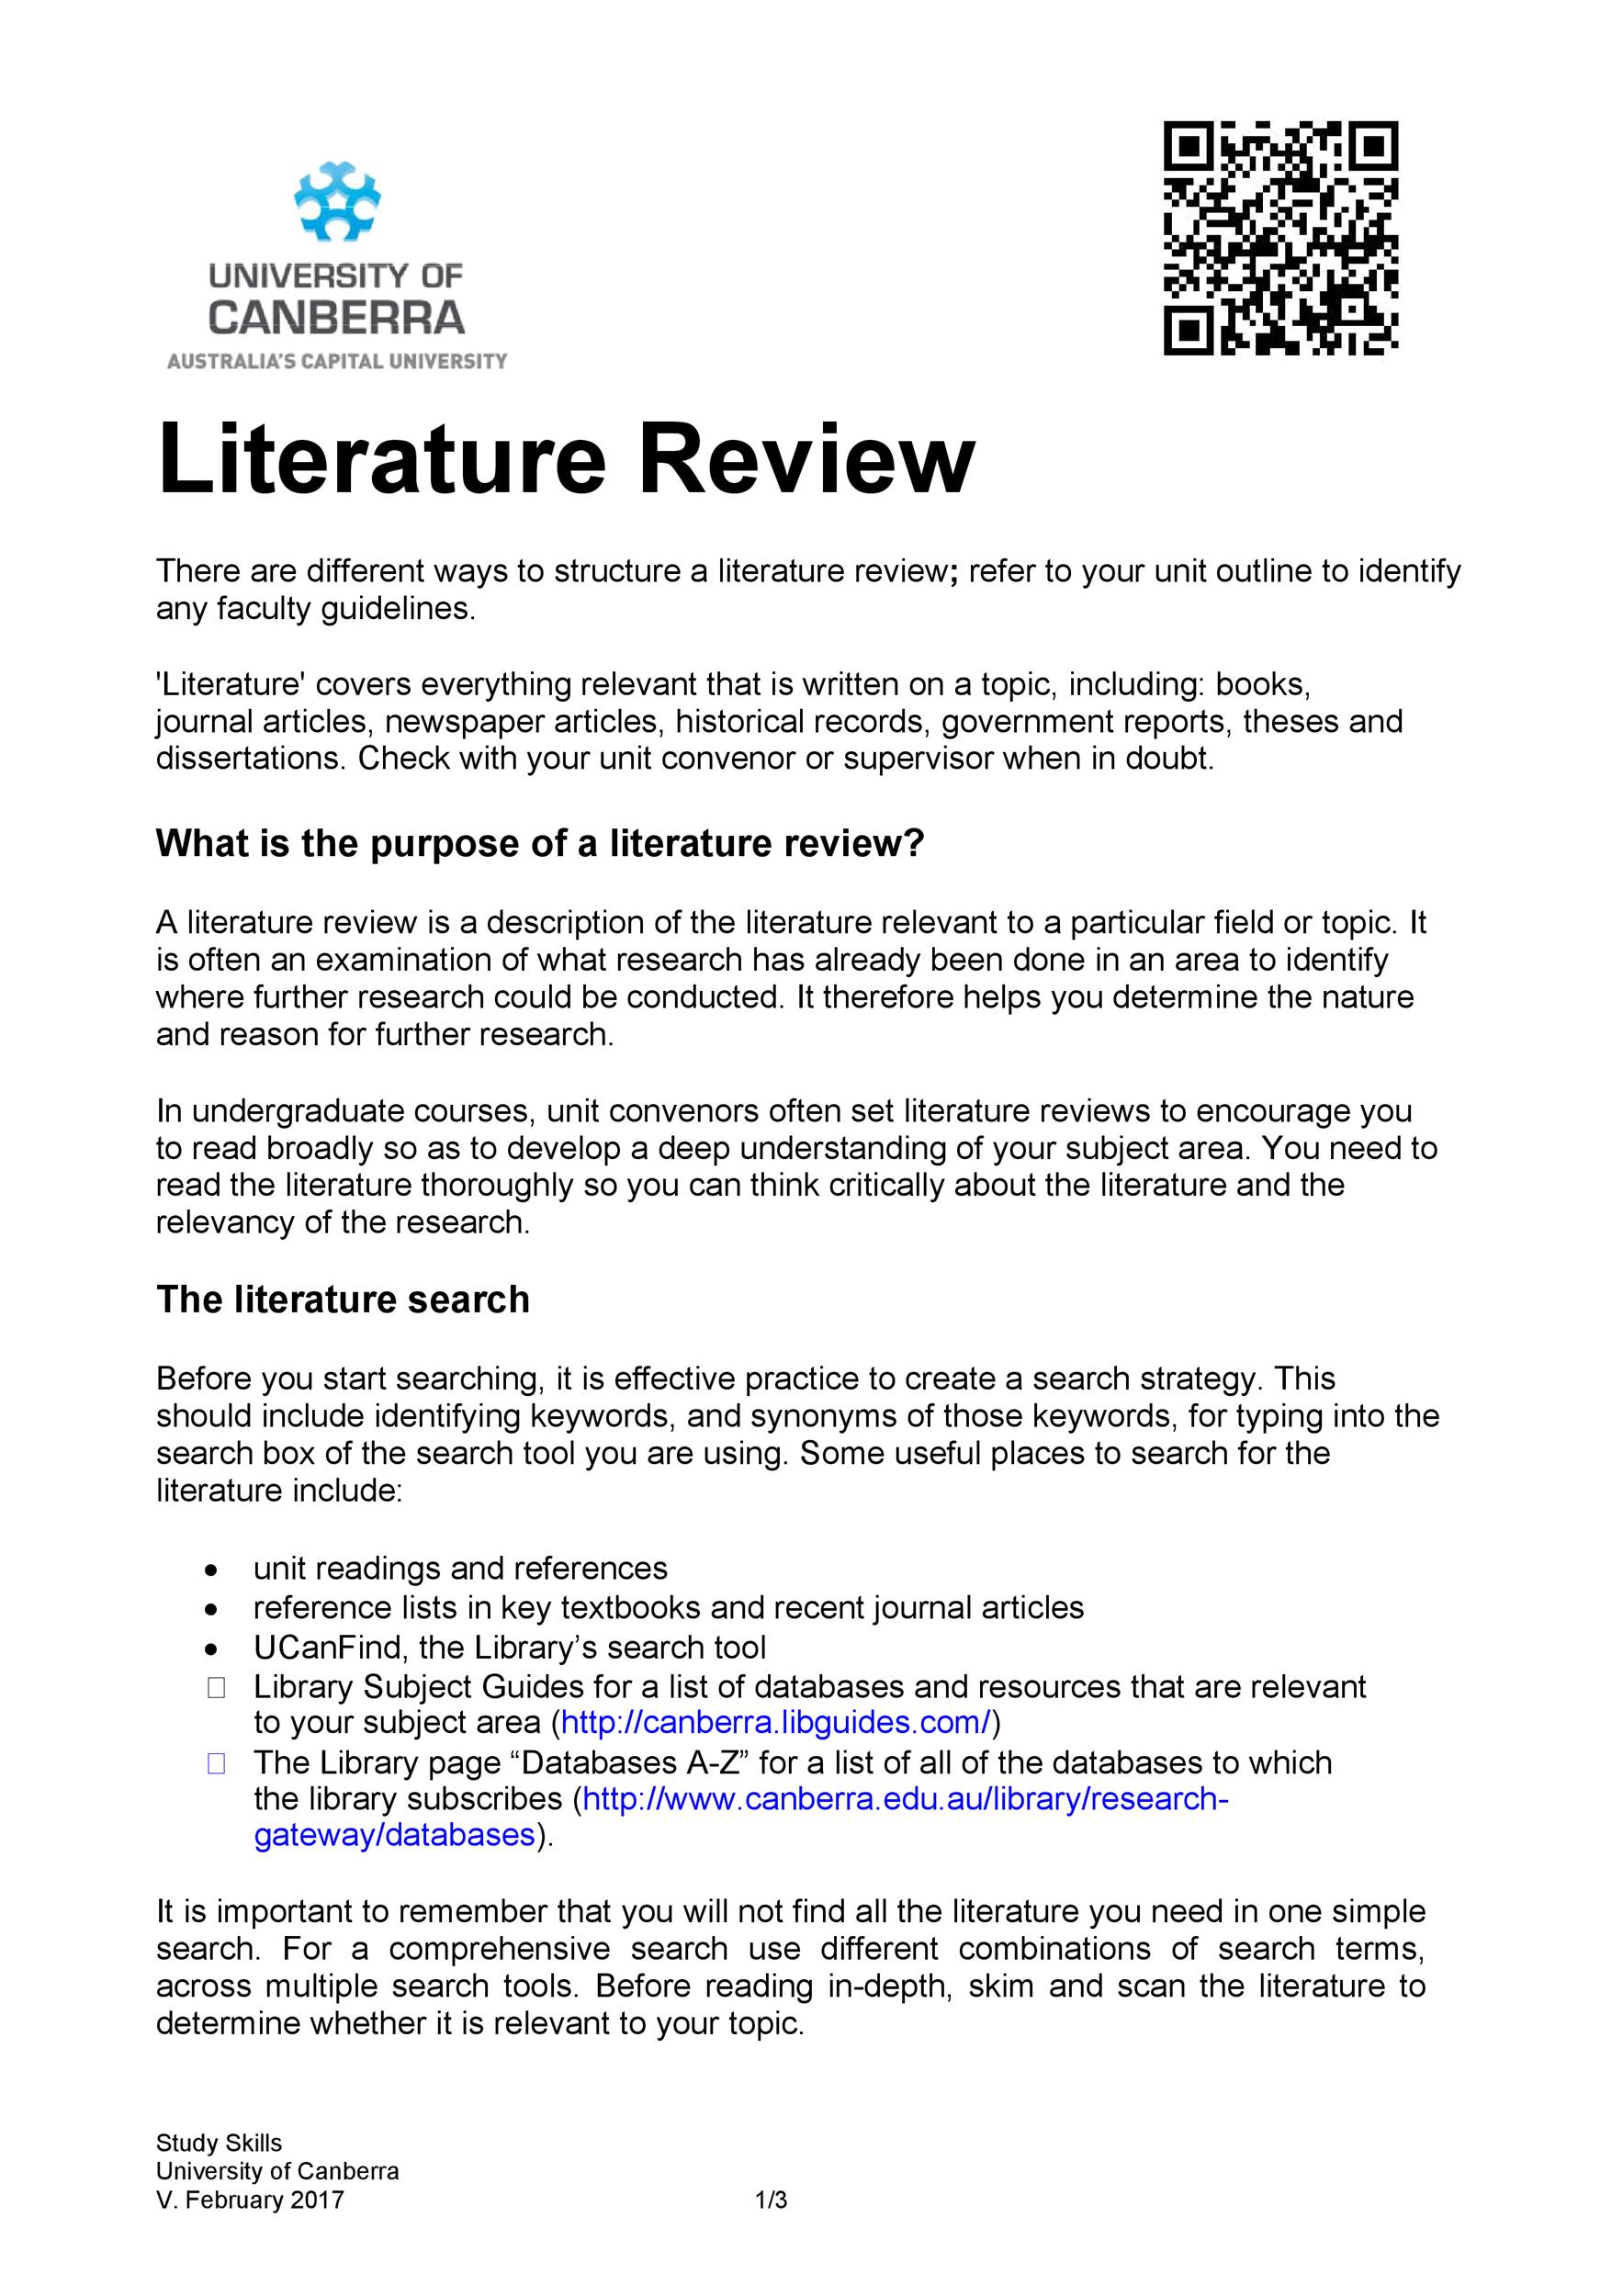 how to write a literature review university of birmingham